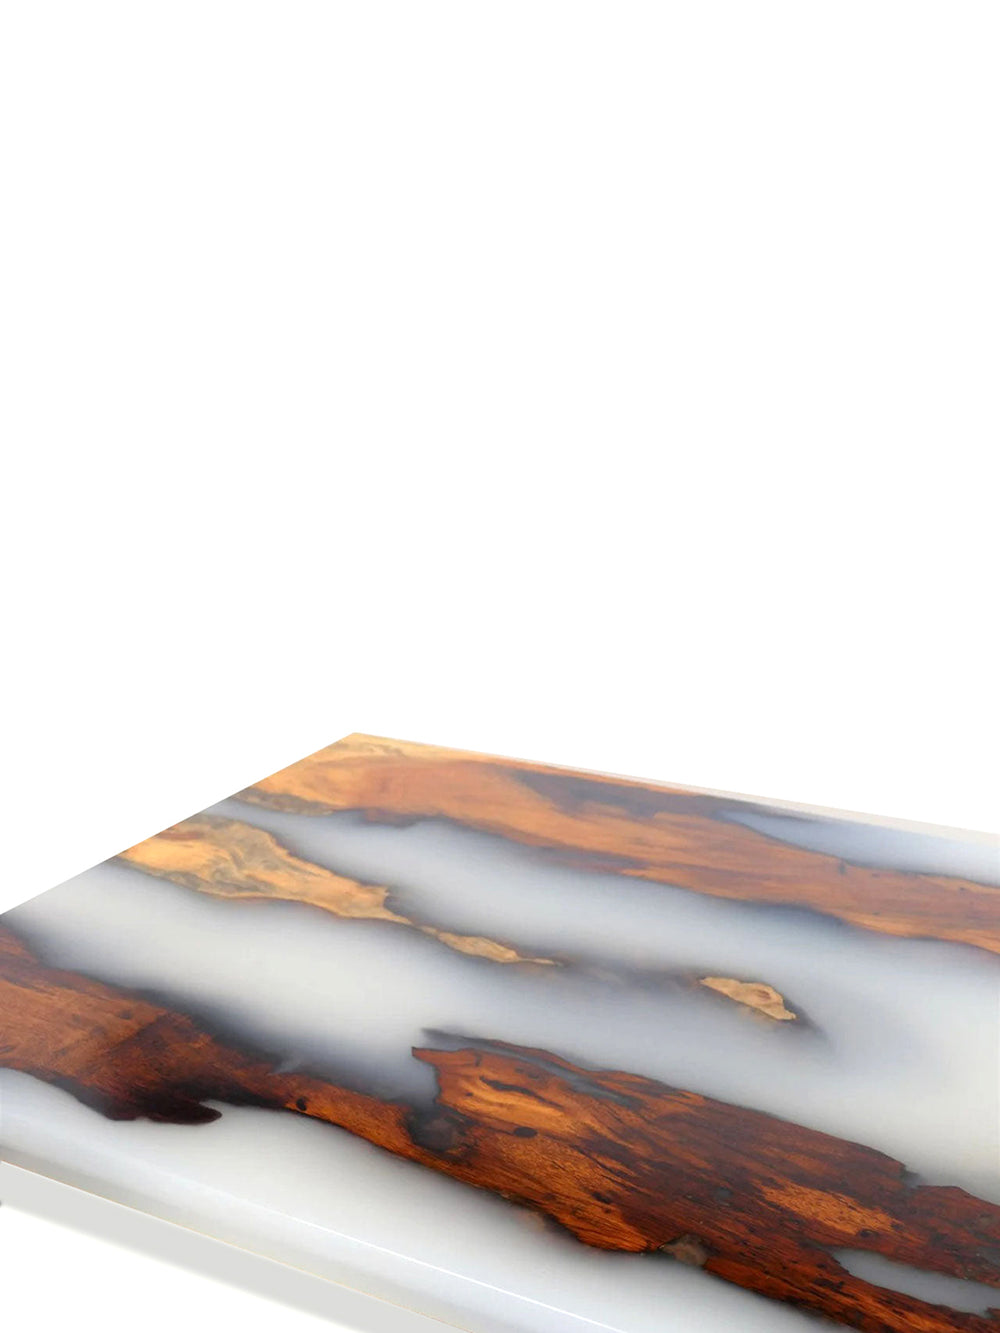 Handcrafted Rosewood Slab Epoxy Resin Wooden Dining Table | 170x70cm Made 4 Decor Tables MDR0002-1